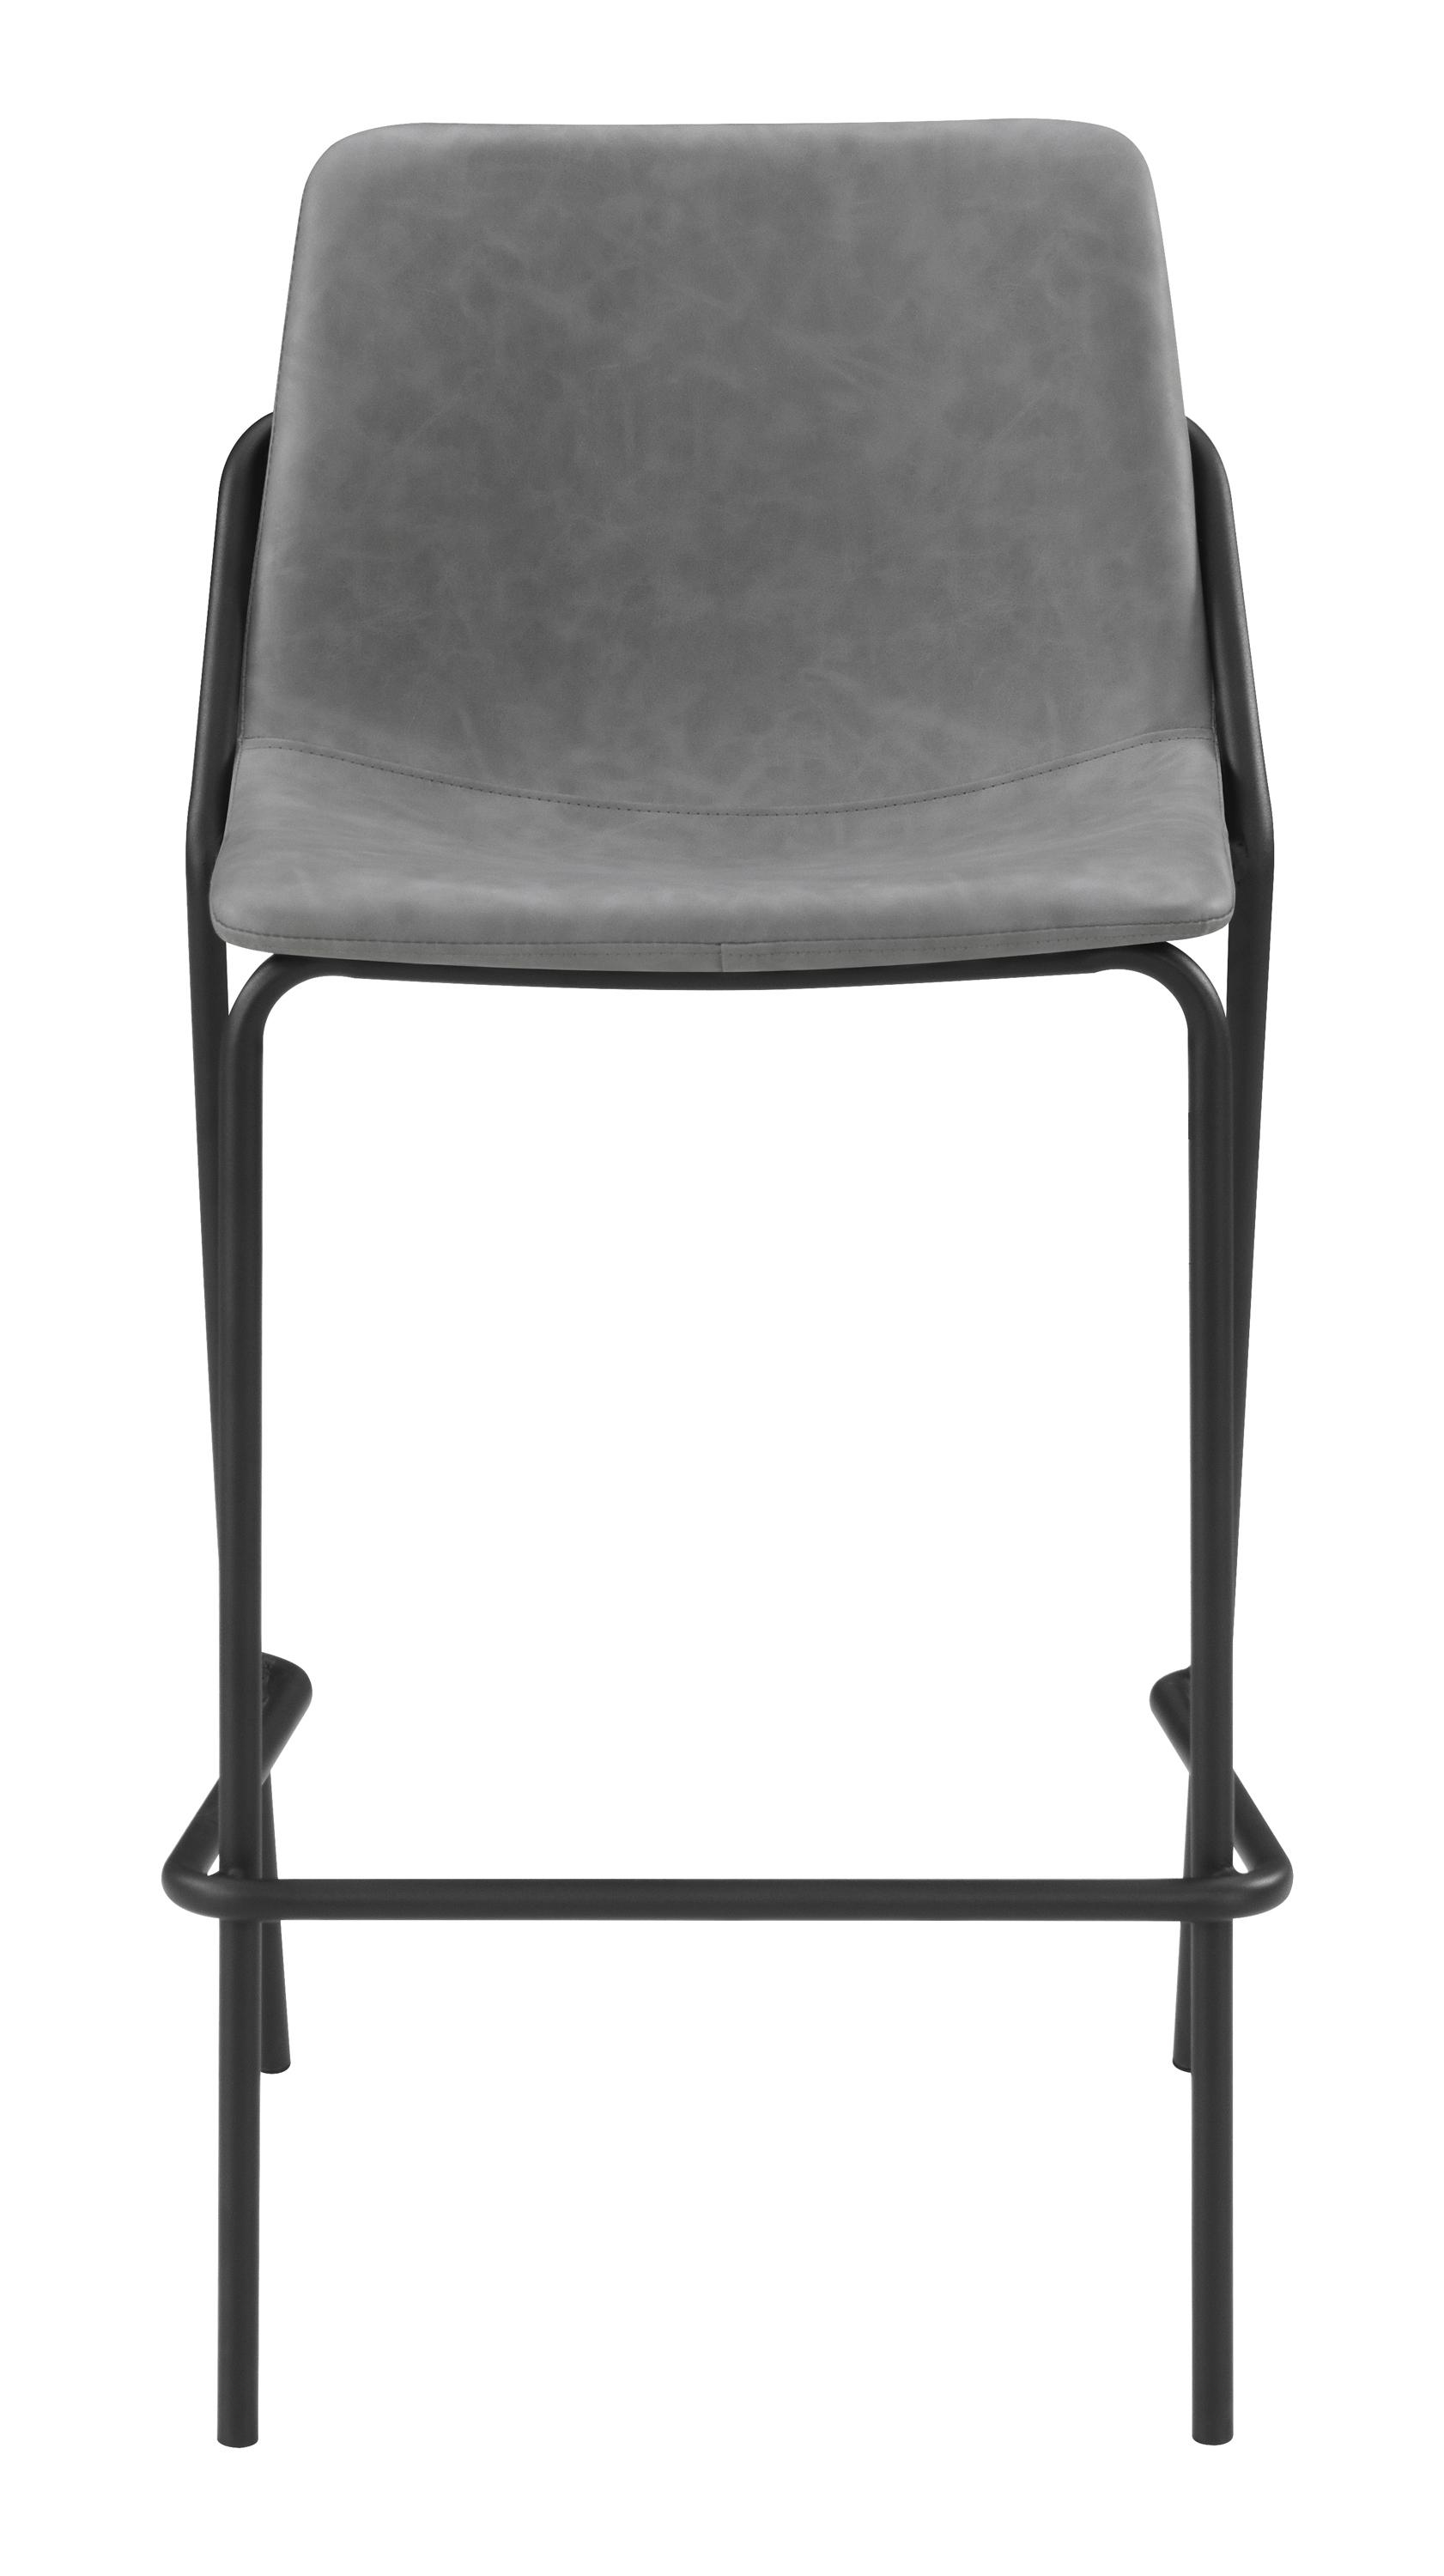 Contemporary Bar Stool Set 183453 183453 in Gray Leatherette